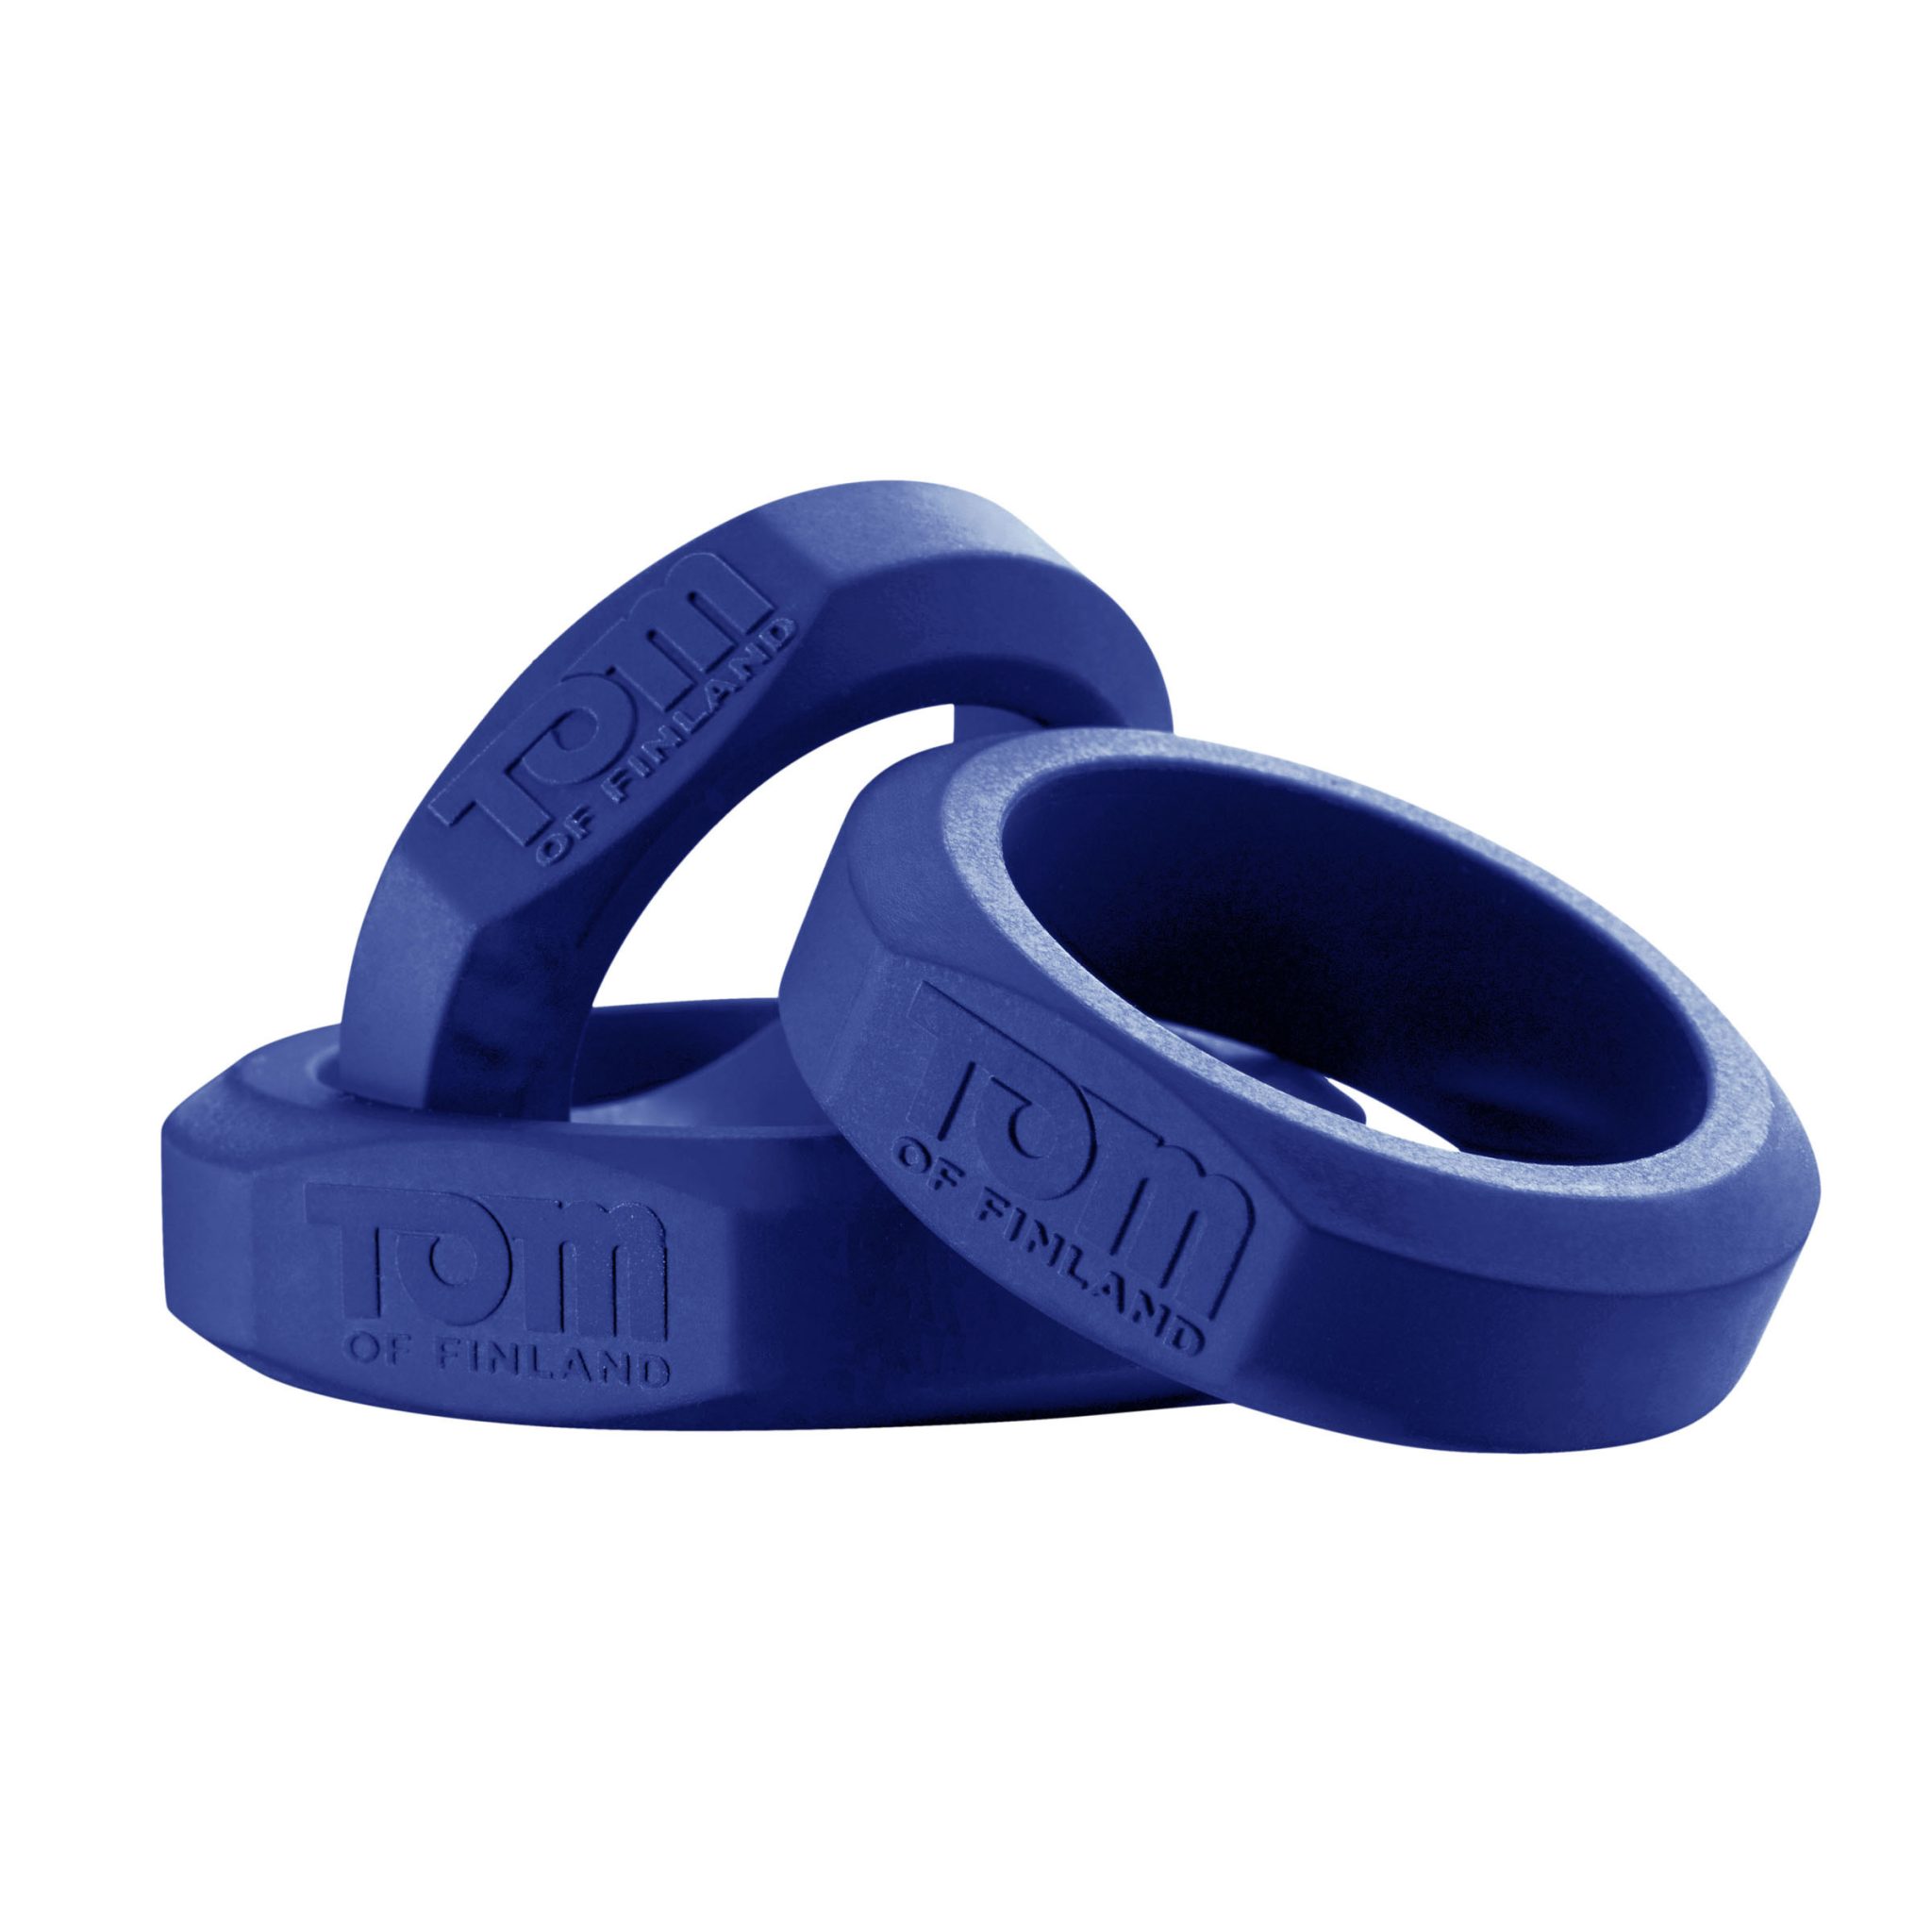 Tom of Finland 3 Piece Silicone Cock Ring Set – Blue